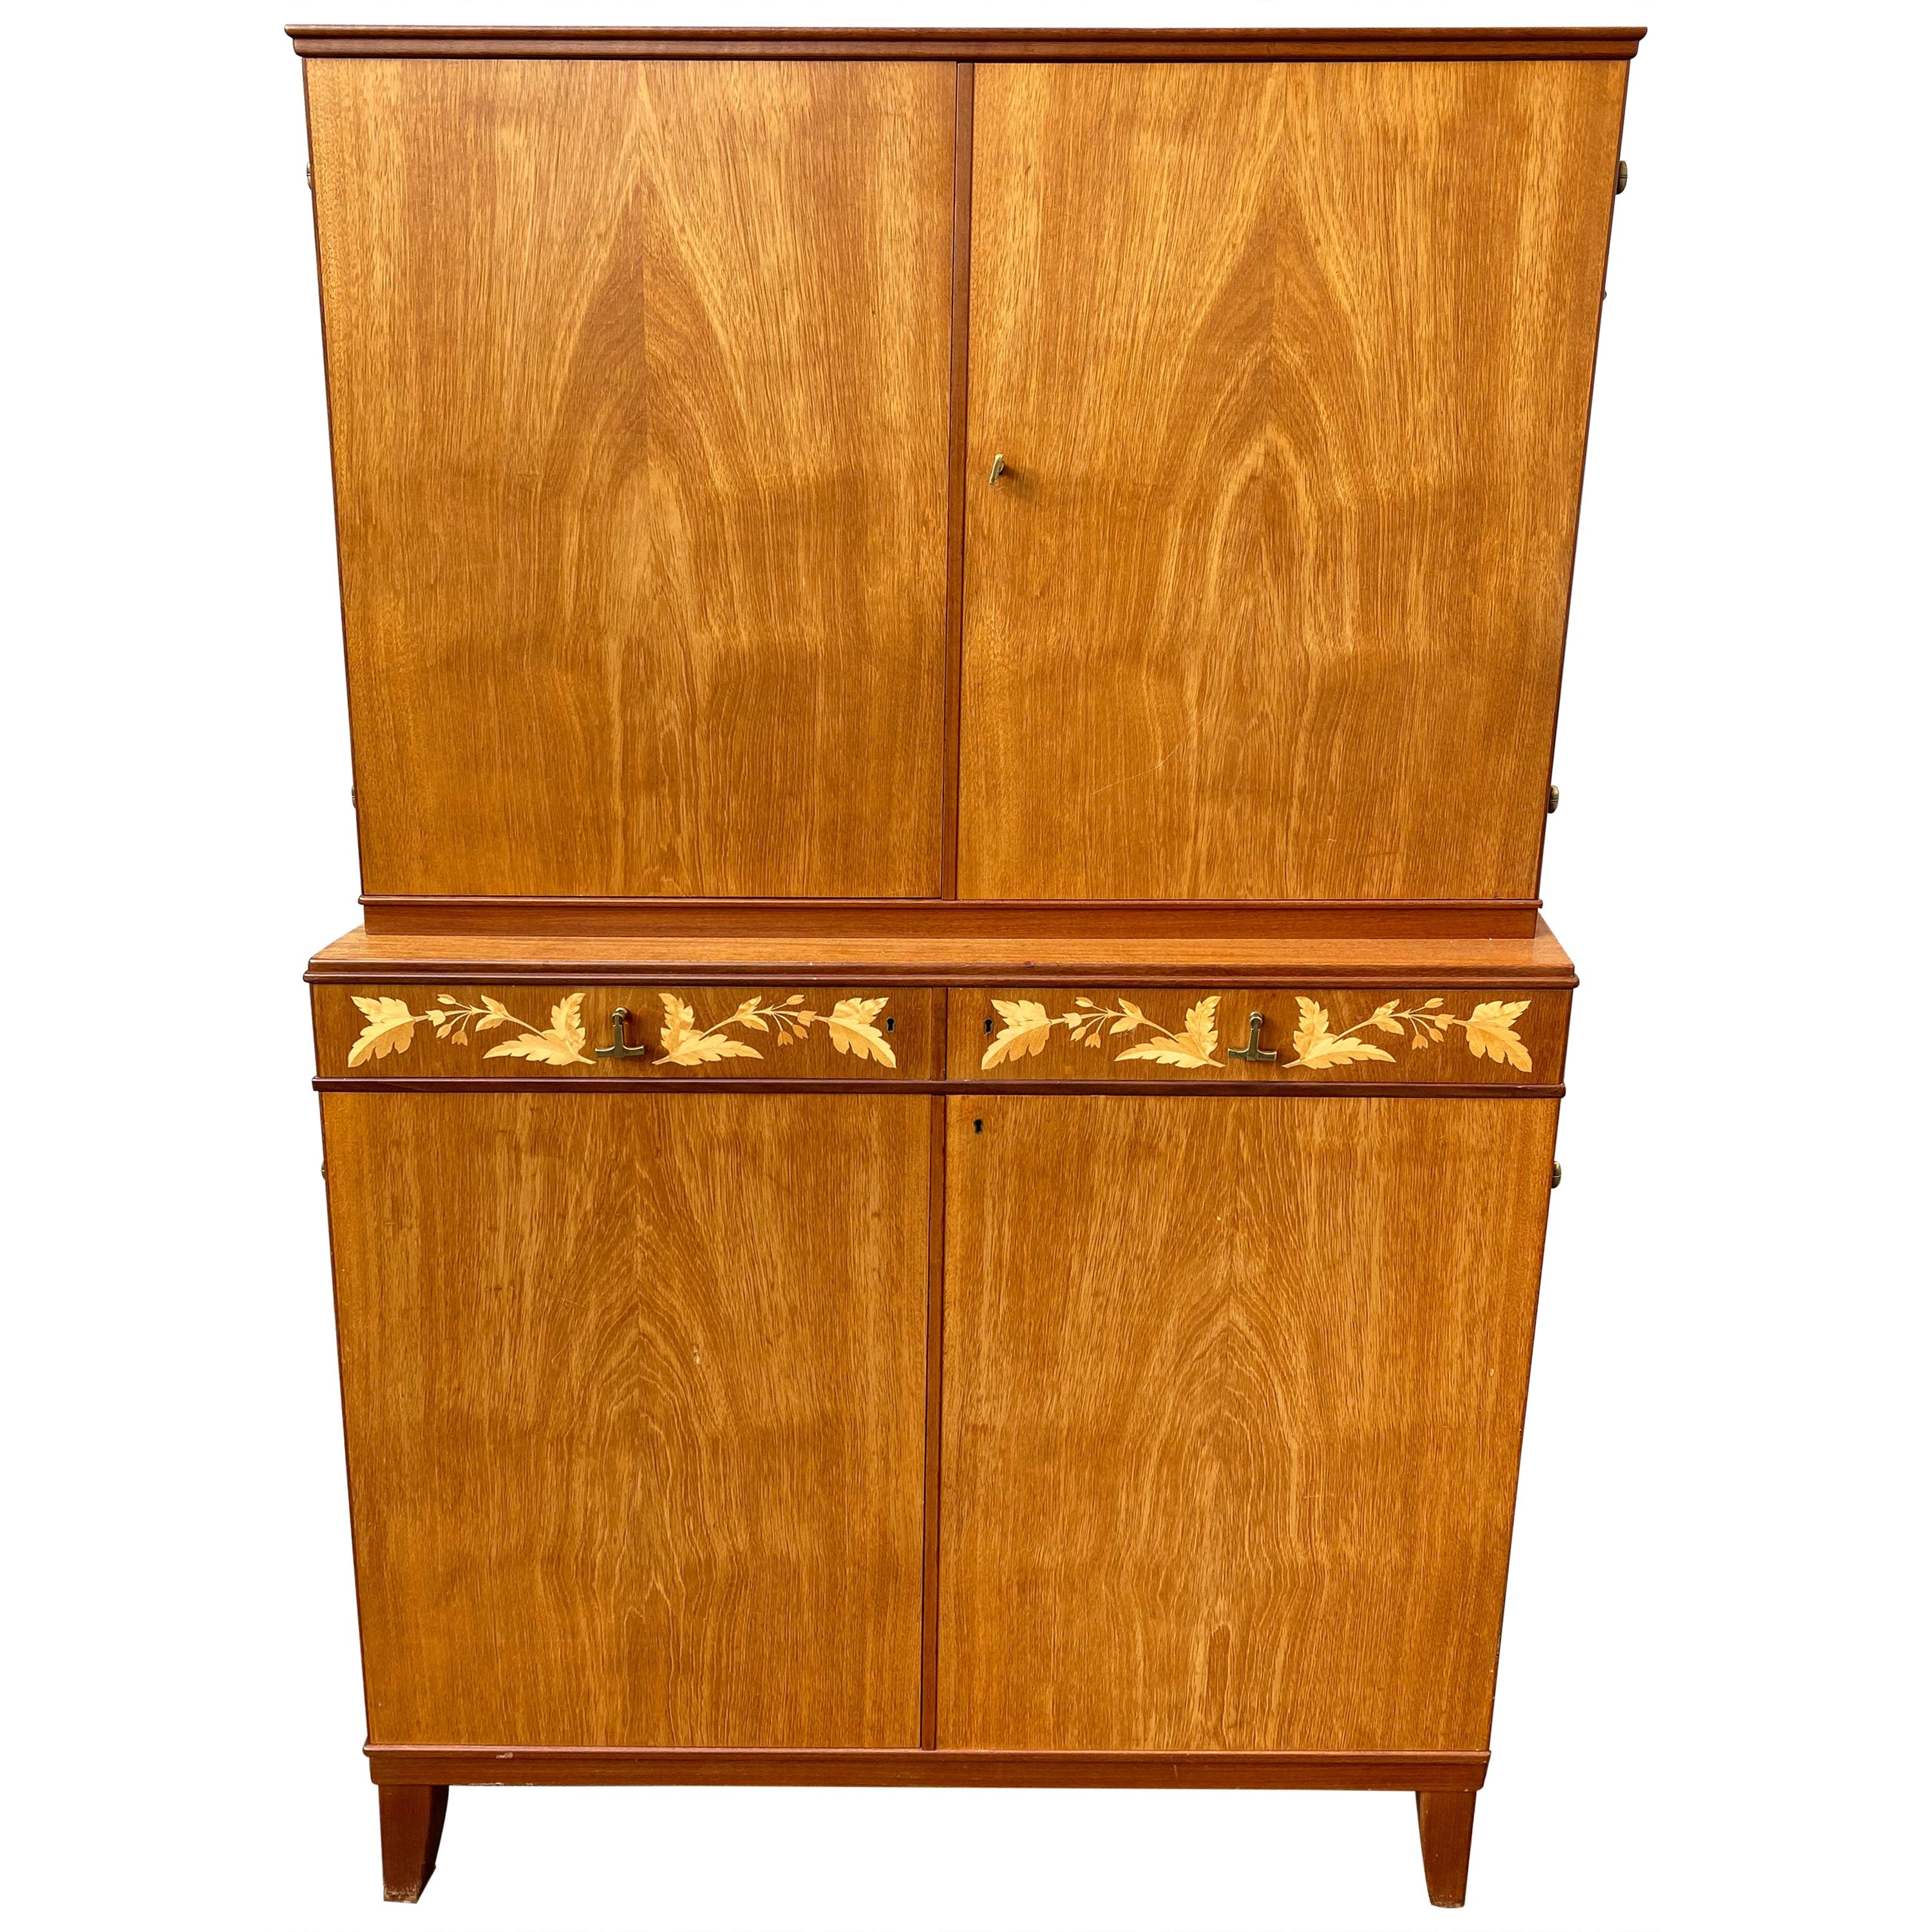 Swedish Mid-Century Modern Inlaid Cabinet With Brass Hardware By J.O. Carlssons